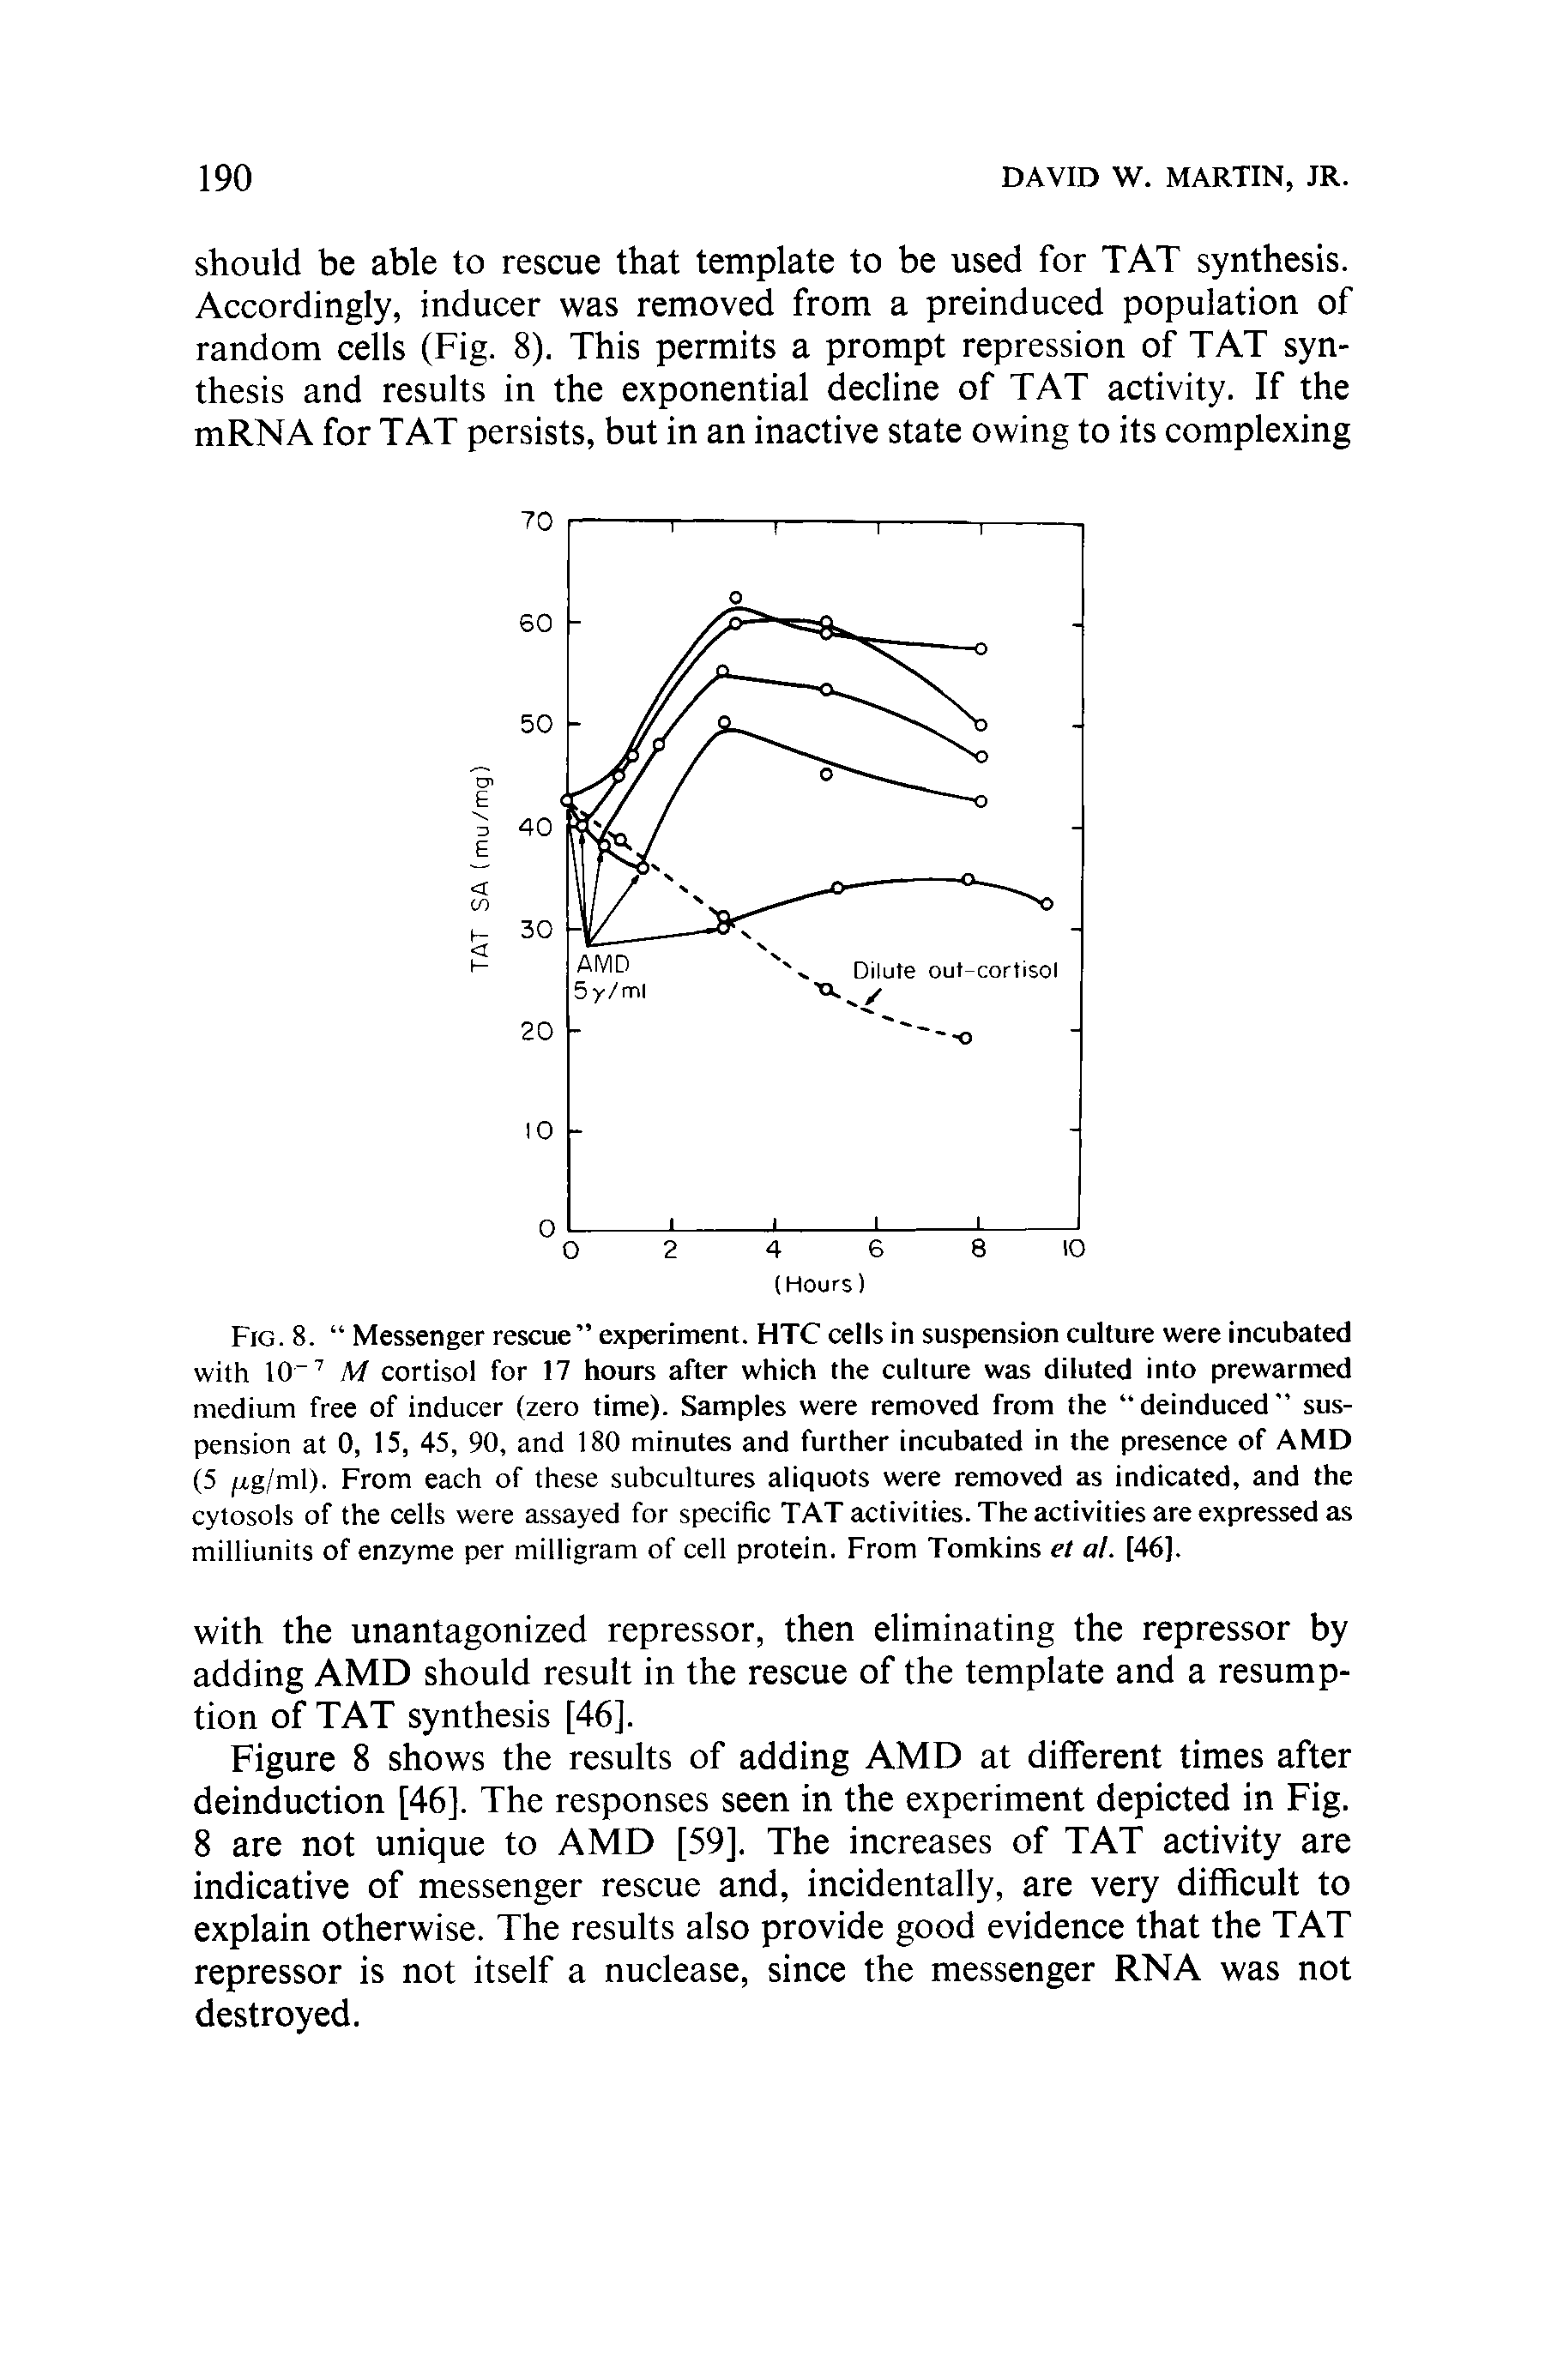 Fig. 8. Messenger rescue experiment. HTC cells in suspension culture were incubated with 10" M cortisol for 17 hours after which the culture was diluted into prewarmed medium free of inducer (zero time). Samples were removed from the deinduced suspension at 0, 15, 45, 90, and 180 minutes and further incubated in the presence of AMD (5 /xg/ml). From each of these subcultures aliquots were removed as indicated, and the cytosols of the cells were assayed for specific TAT activities. The activities are expressed as milliunits of enzyme per milligram of cell protein. From Tomkins et al. [46].